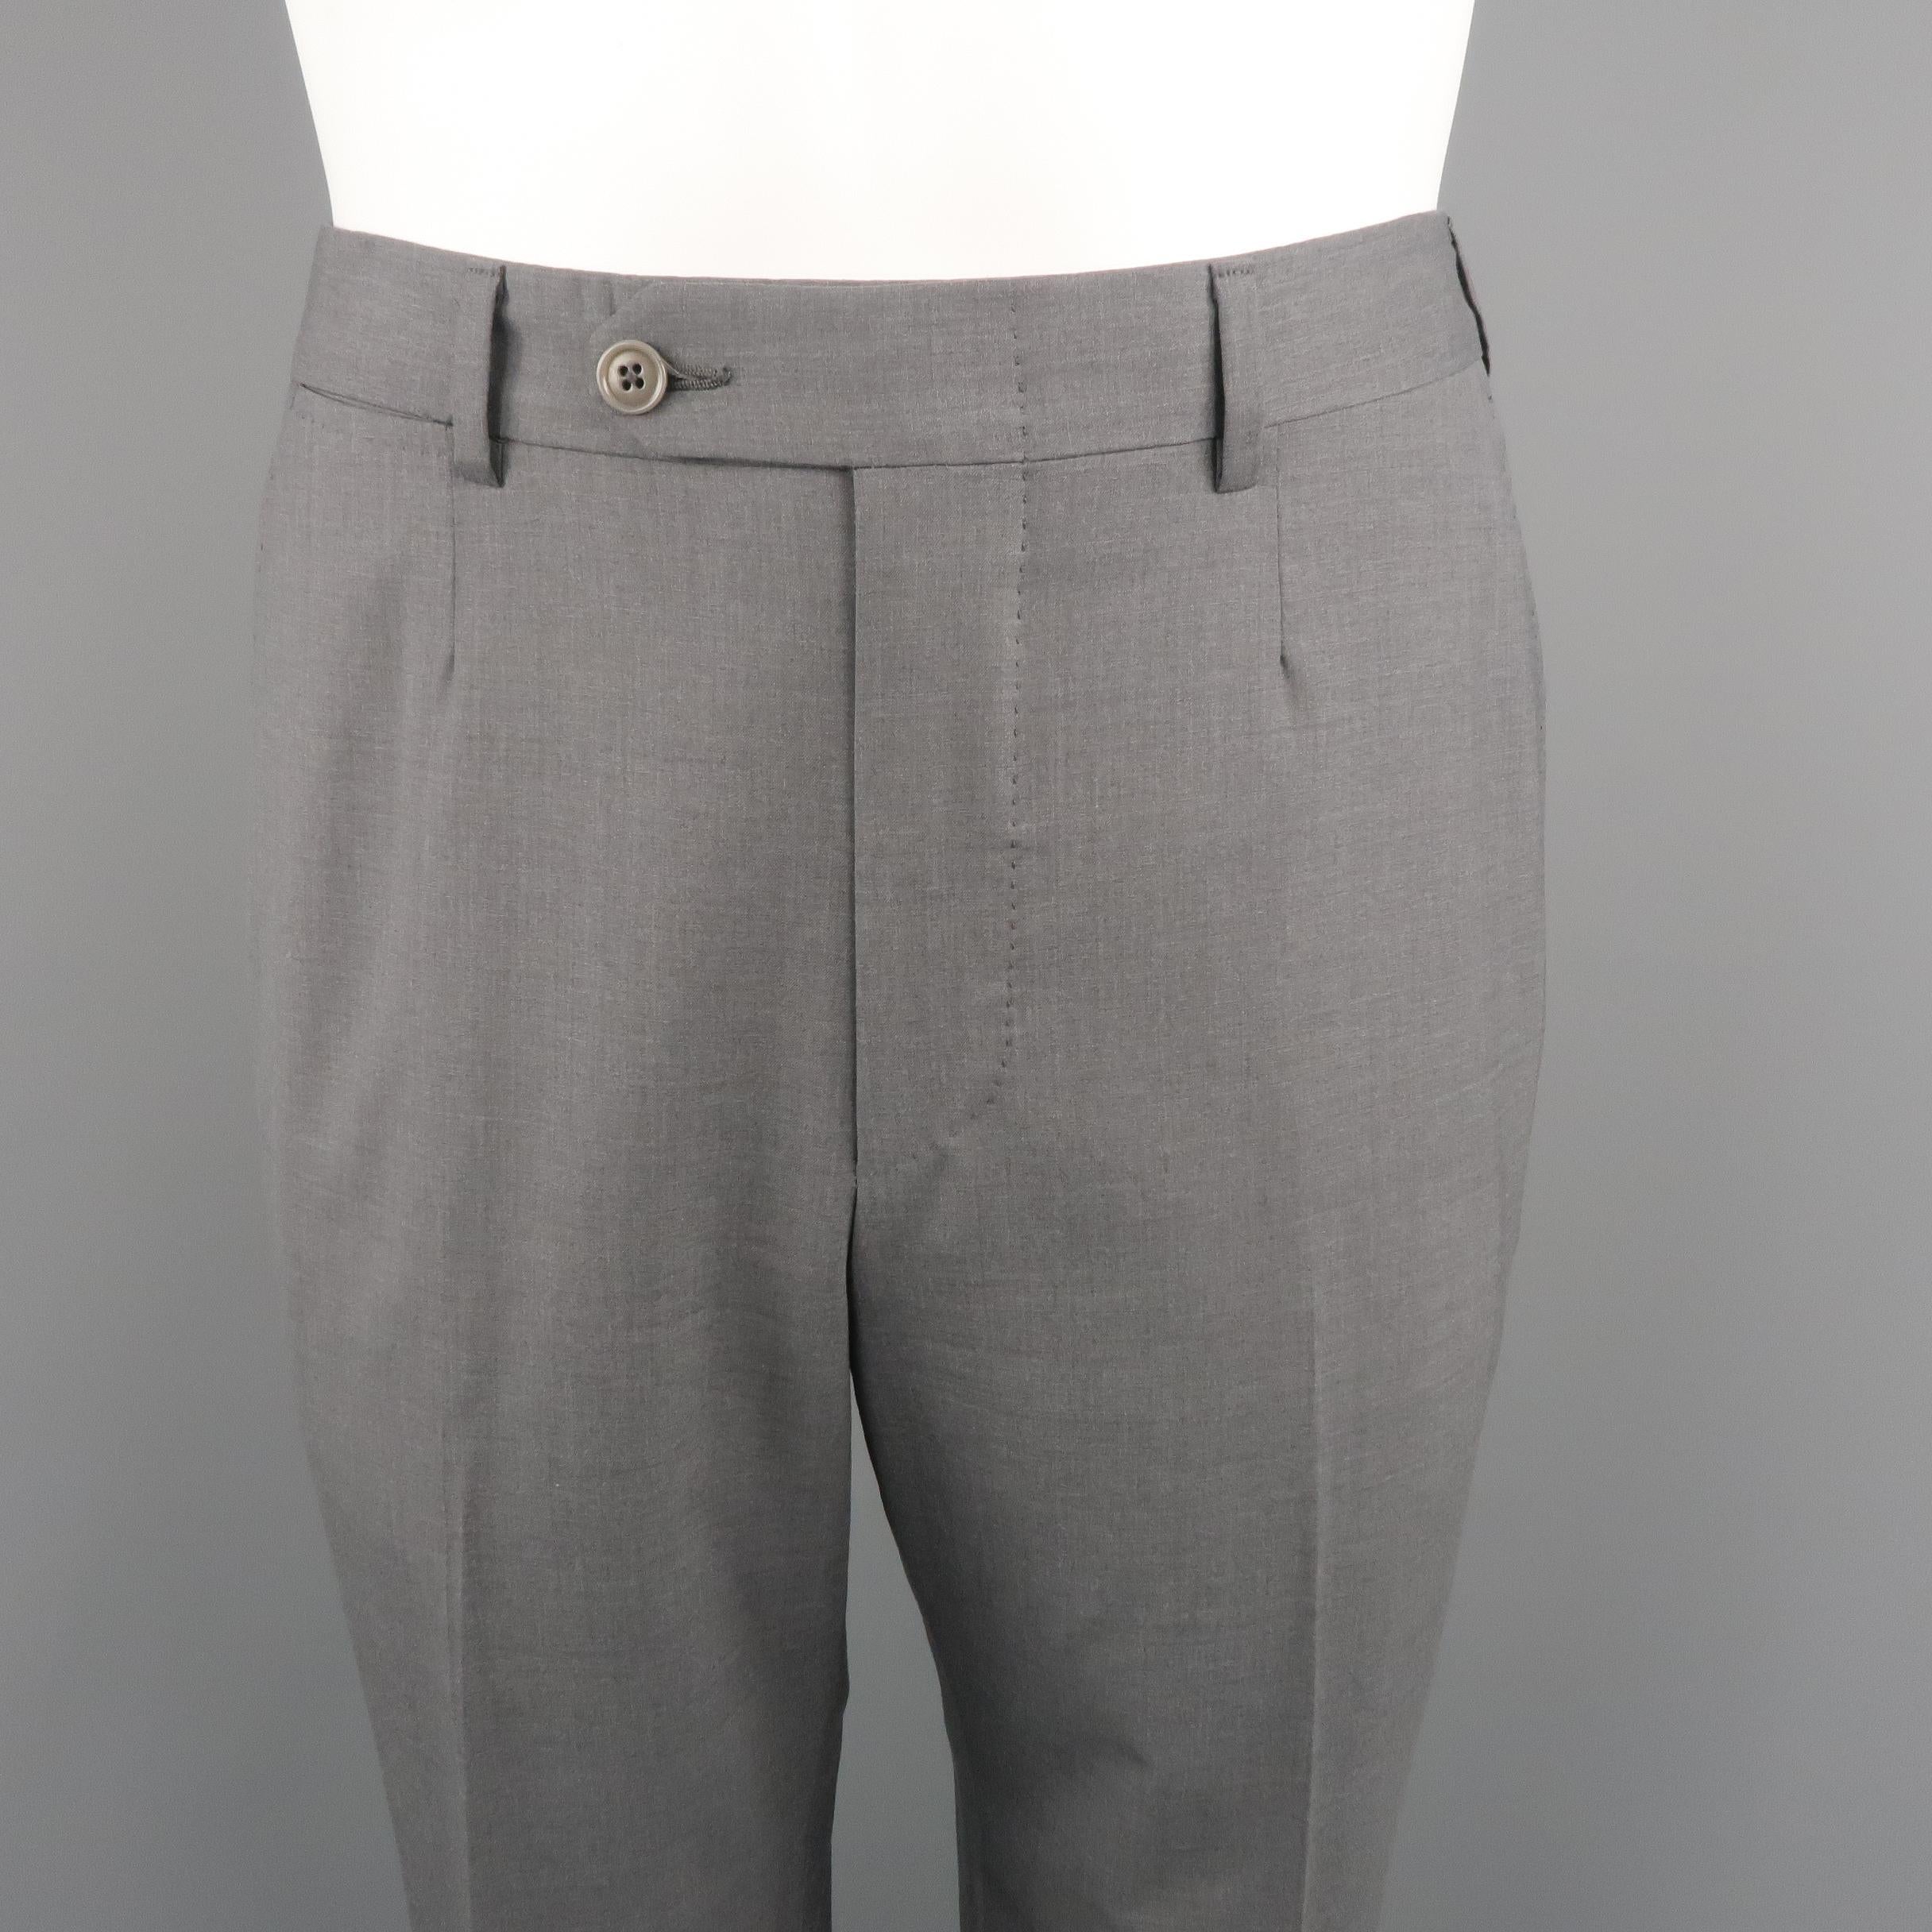 ERMENEGILDO ZEGNA dress pants come in dark gray tone in solid wool material with waistband, and slant side pockets. Made in Switzerland.
 
Excellent Pre-Owned Condition.
Marked: 7 - 48 R  IT
 
Measurements:
 
Waist: 33 in.
Rise: 10.5 in.
Inseam: 31